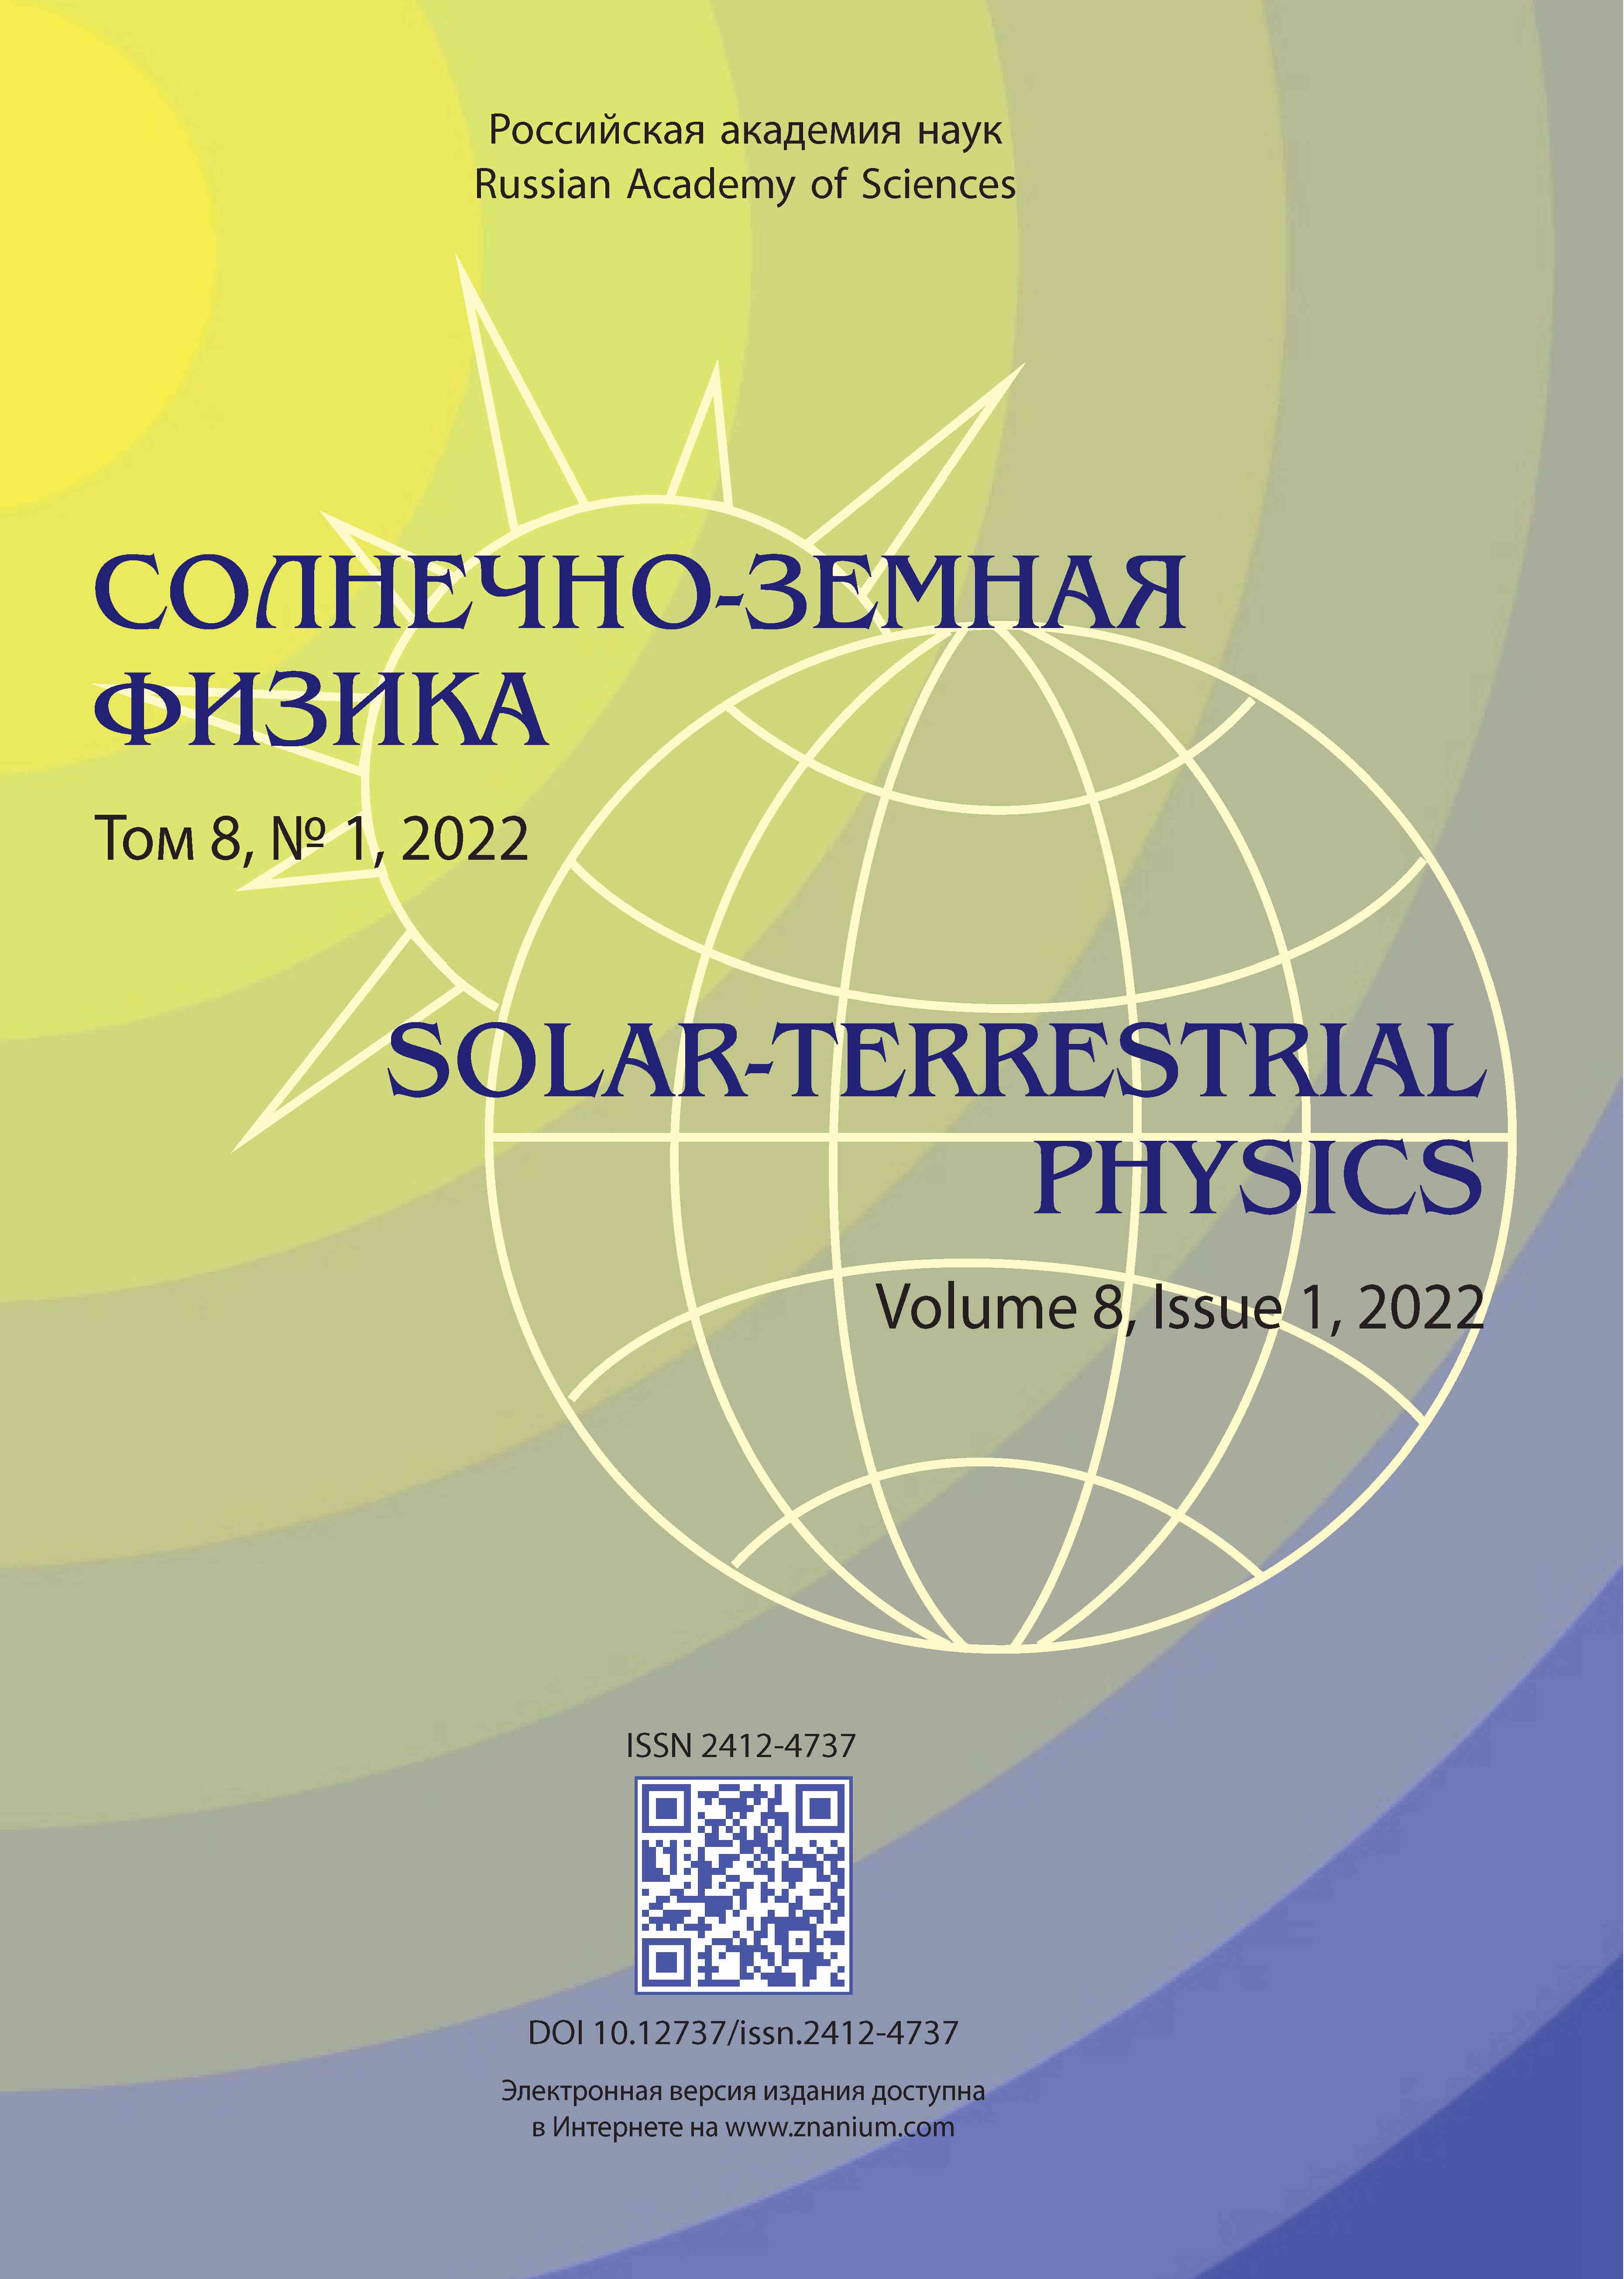                         Peculiarities of sporadic variations in density and anisotropy of galactic cosmic rays in solar cycle 24
            